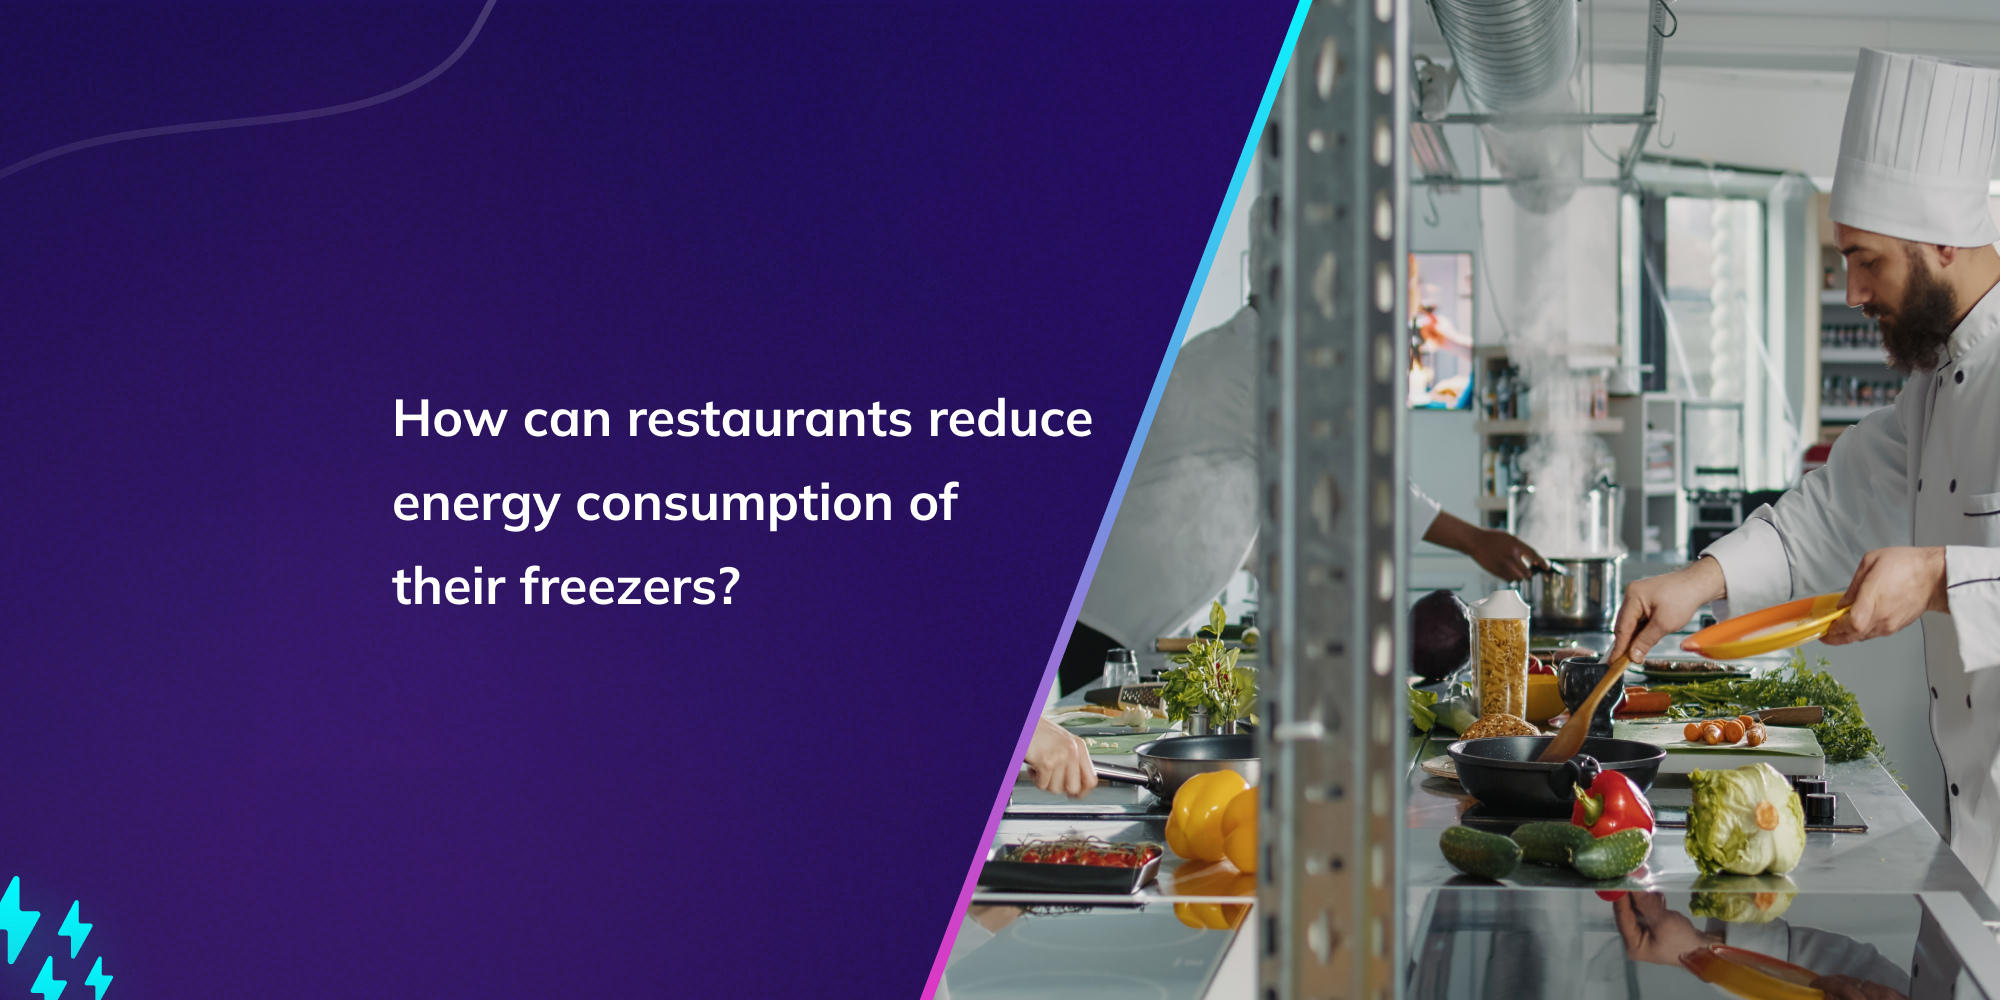 How can restaurants reduce energy consumption of their freezers?